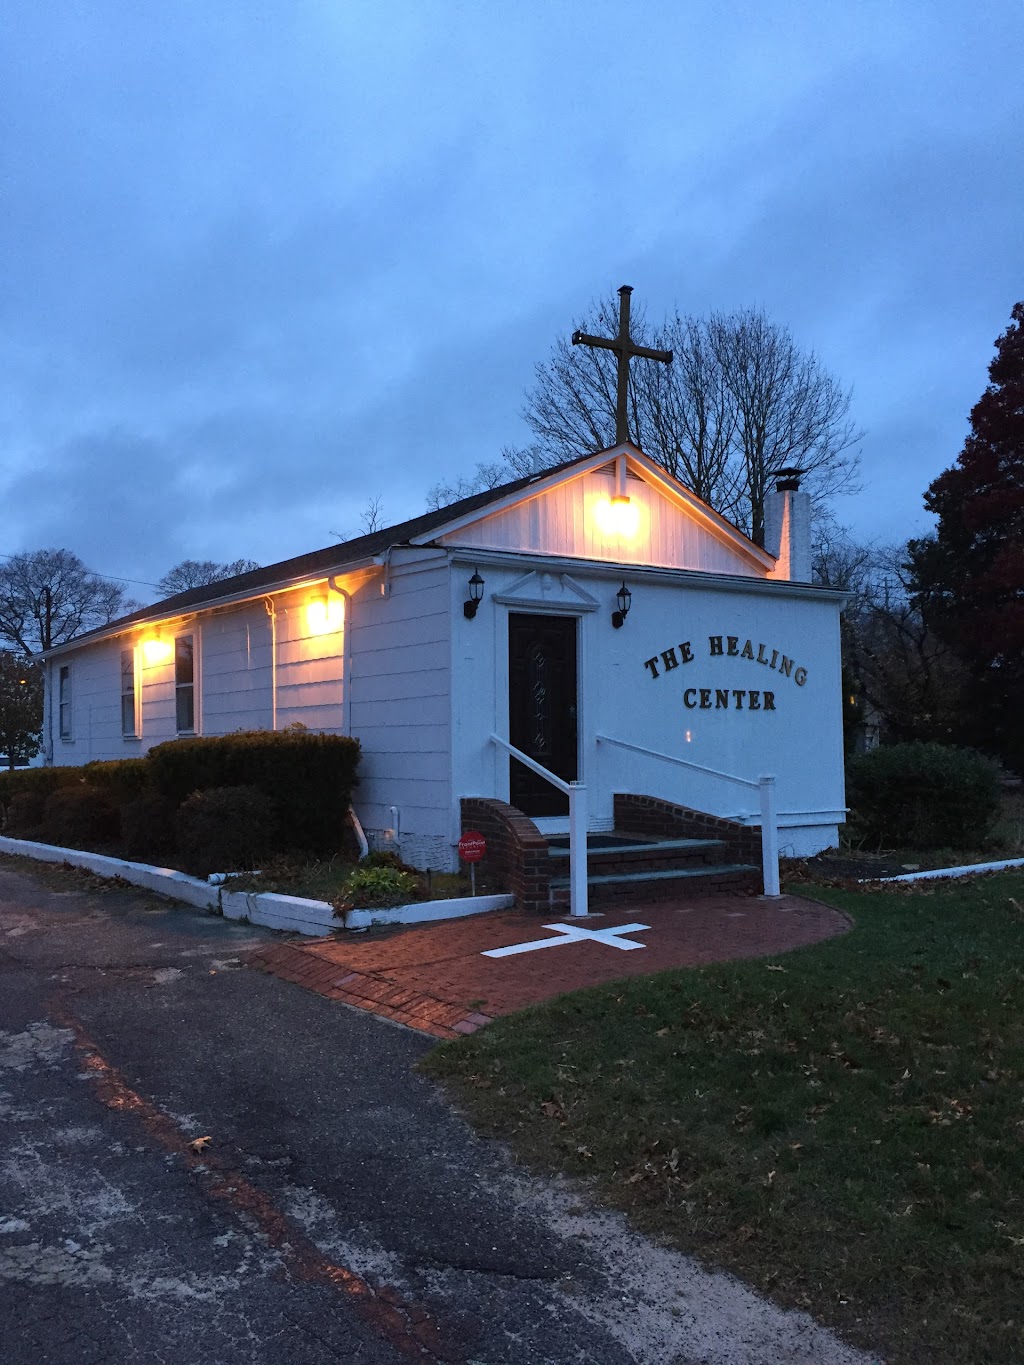 Community of Christ Healing Center | Business District, Jefferson St, Rocky Point, NY 11778 | Phone: (631) 744-3415